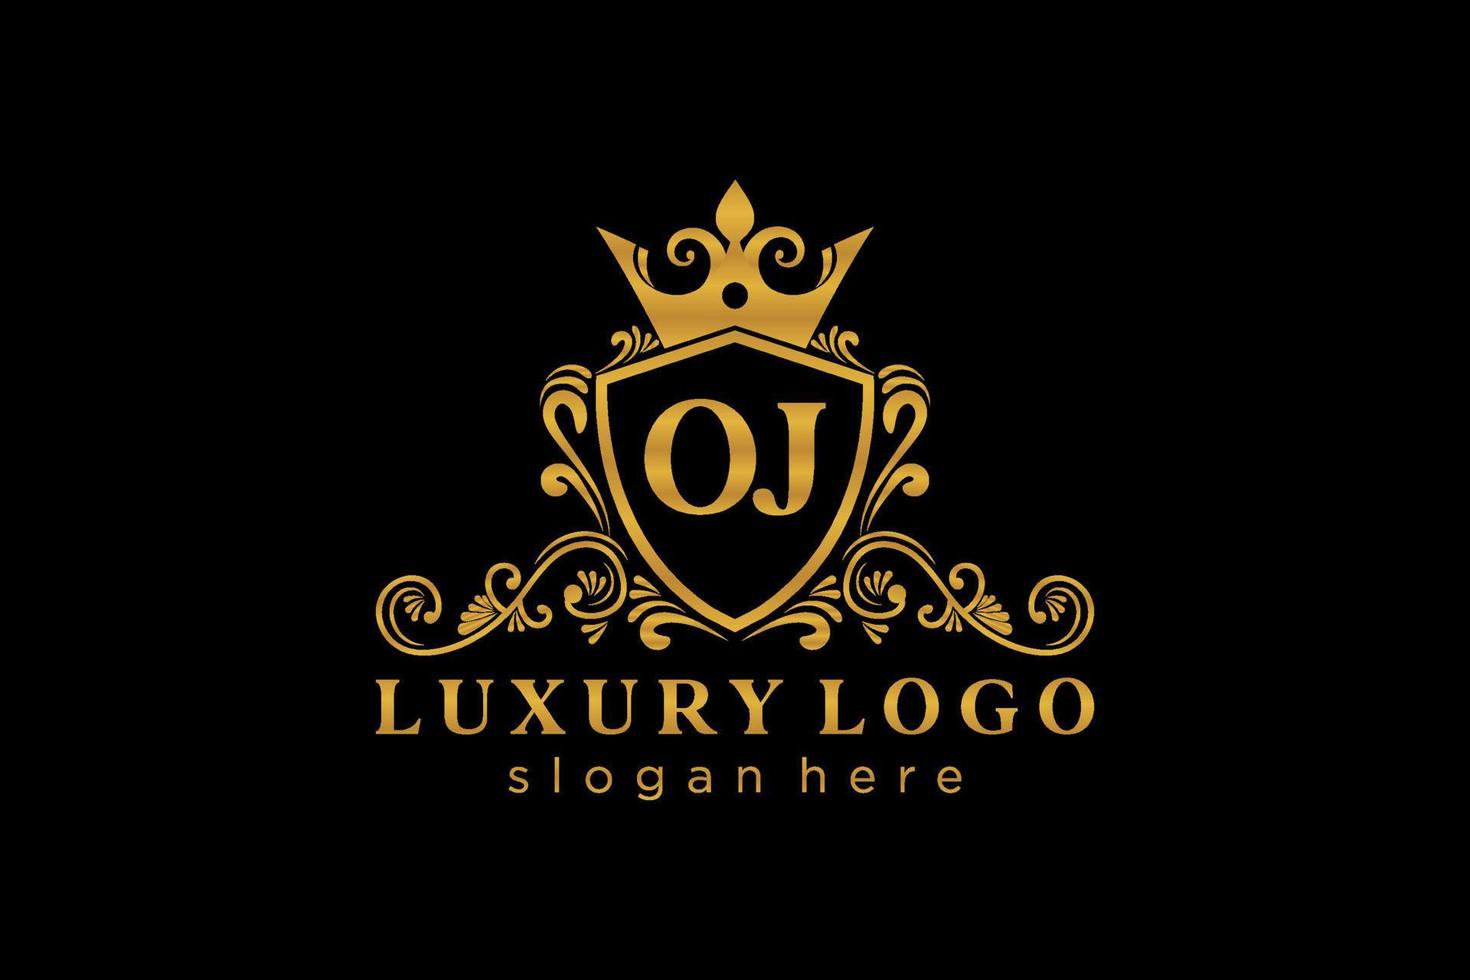 Initial OJ Letter Royal Luxury Logo template in vector art for Restaurant, Royalty, Boutique, Cafe, Hotel, Heraldic, Jewelry, Fashion and other vector illustration.